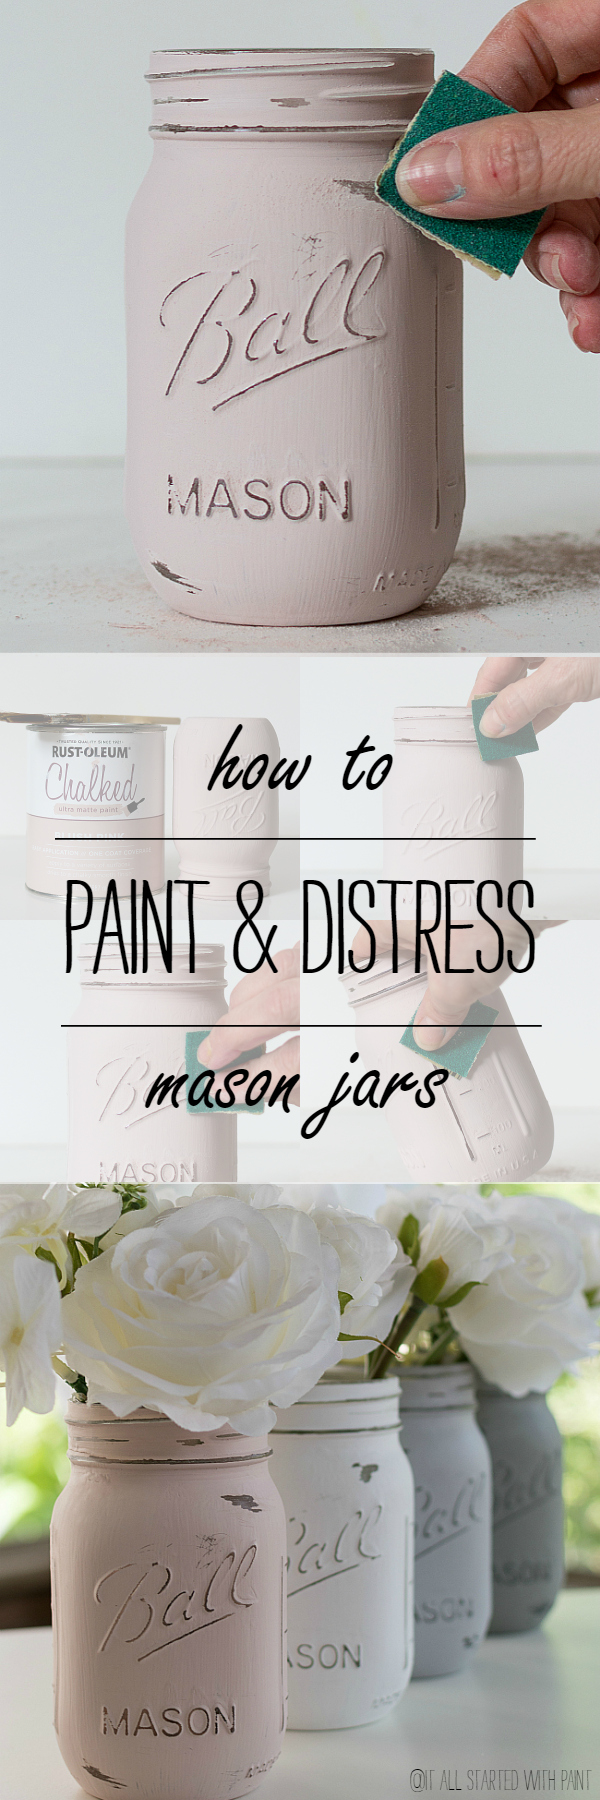 Painted and Distressed Mason Jars: A Step-by-Step Tutorial on How to Create